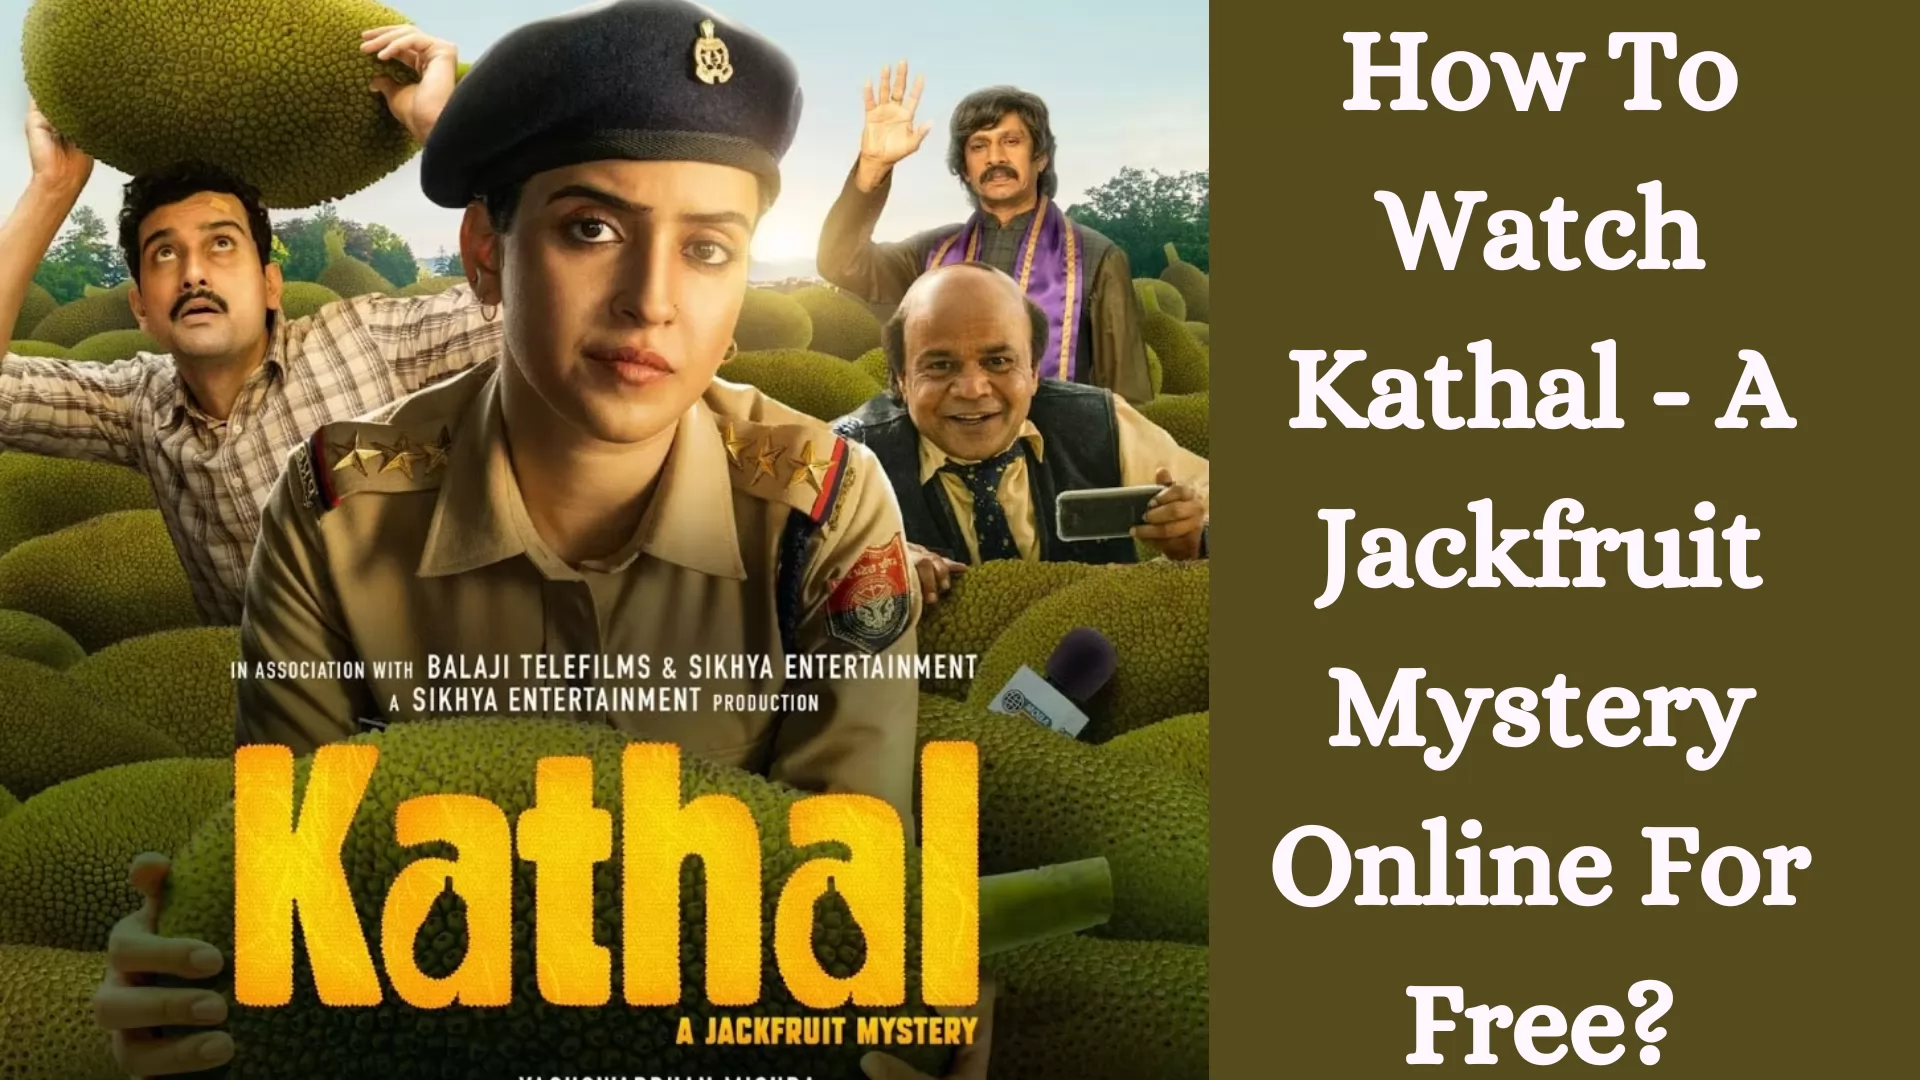 How To Watch Kathal - A Jackfruit Mystery Online For Free?